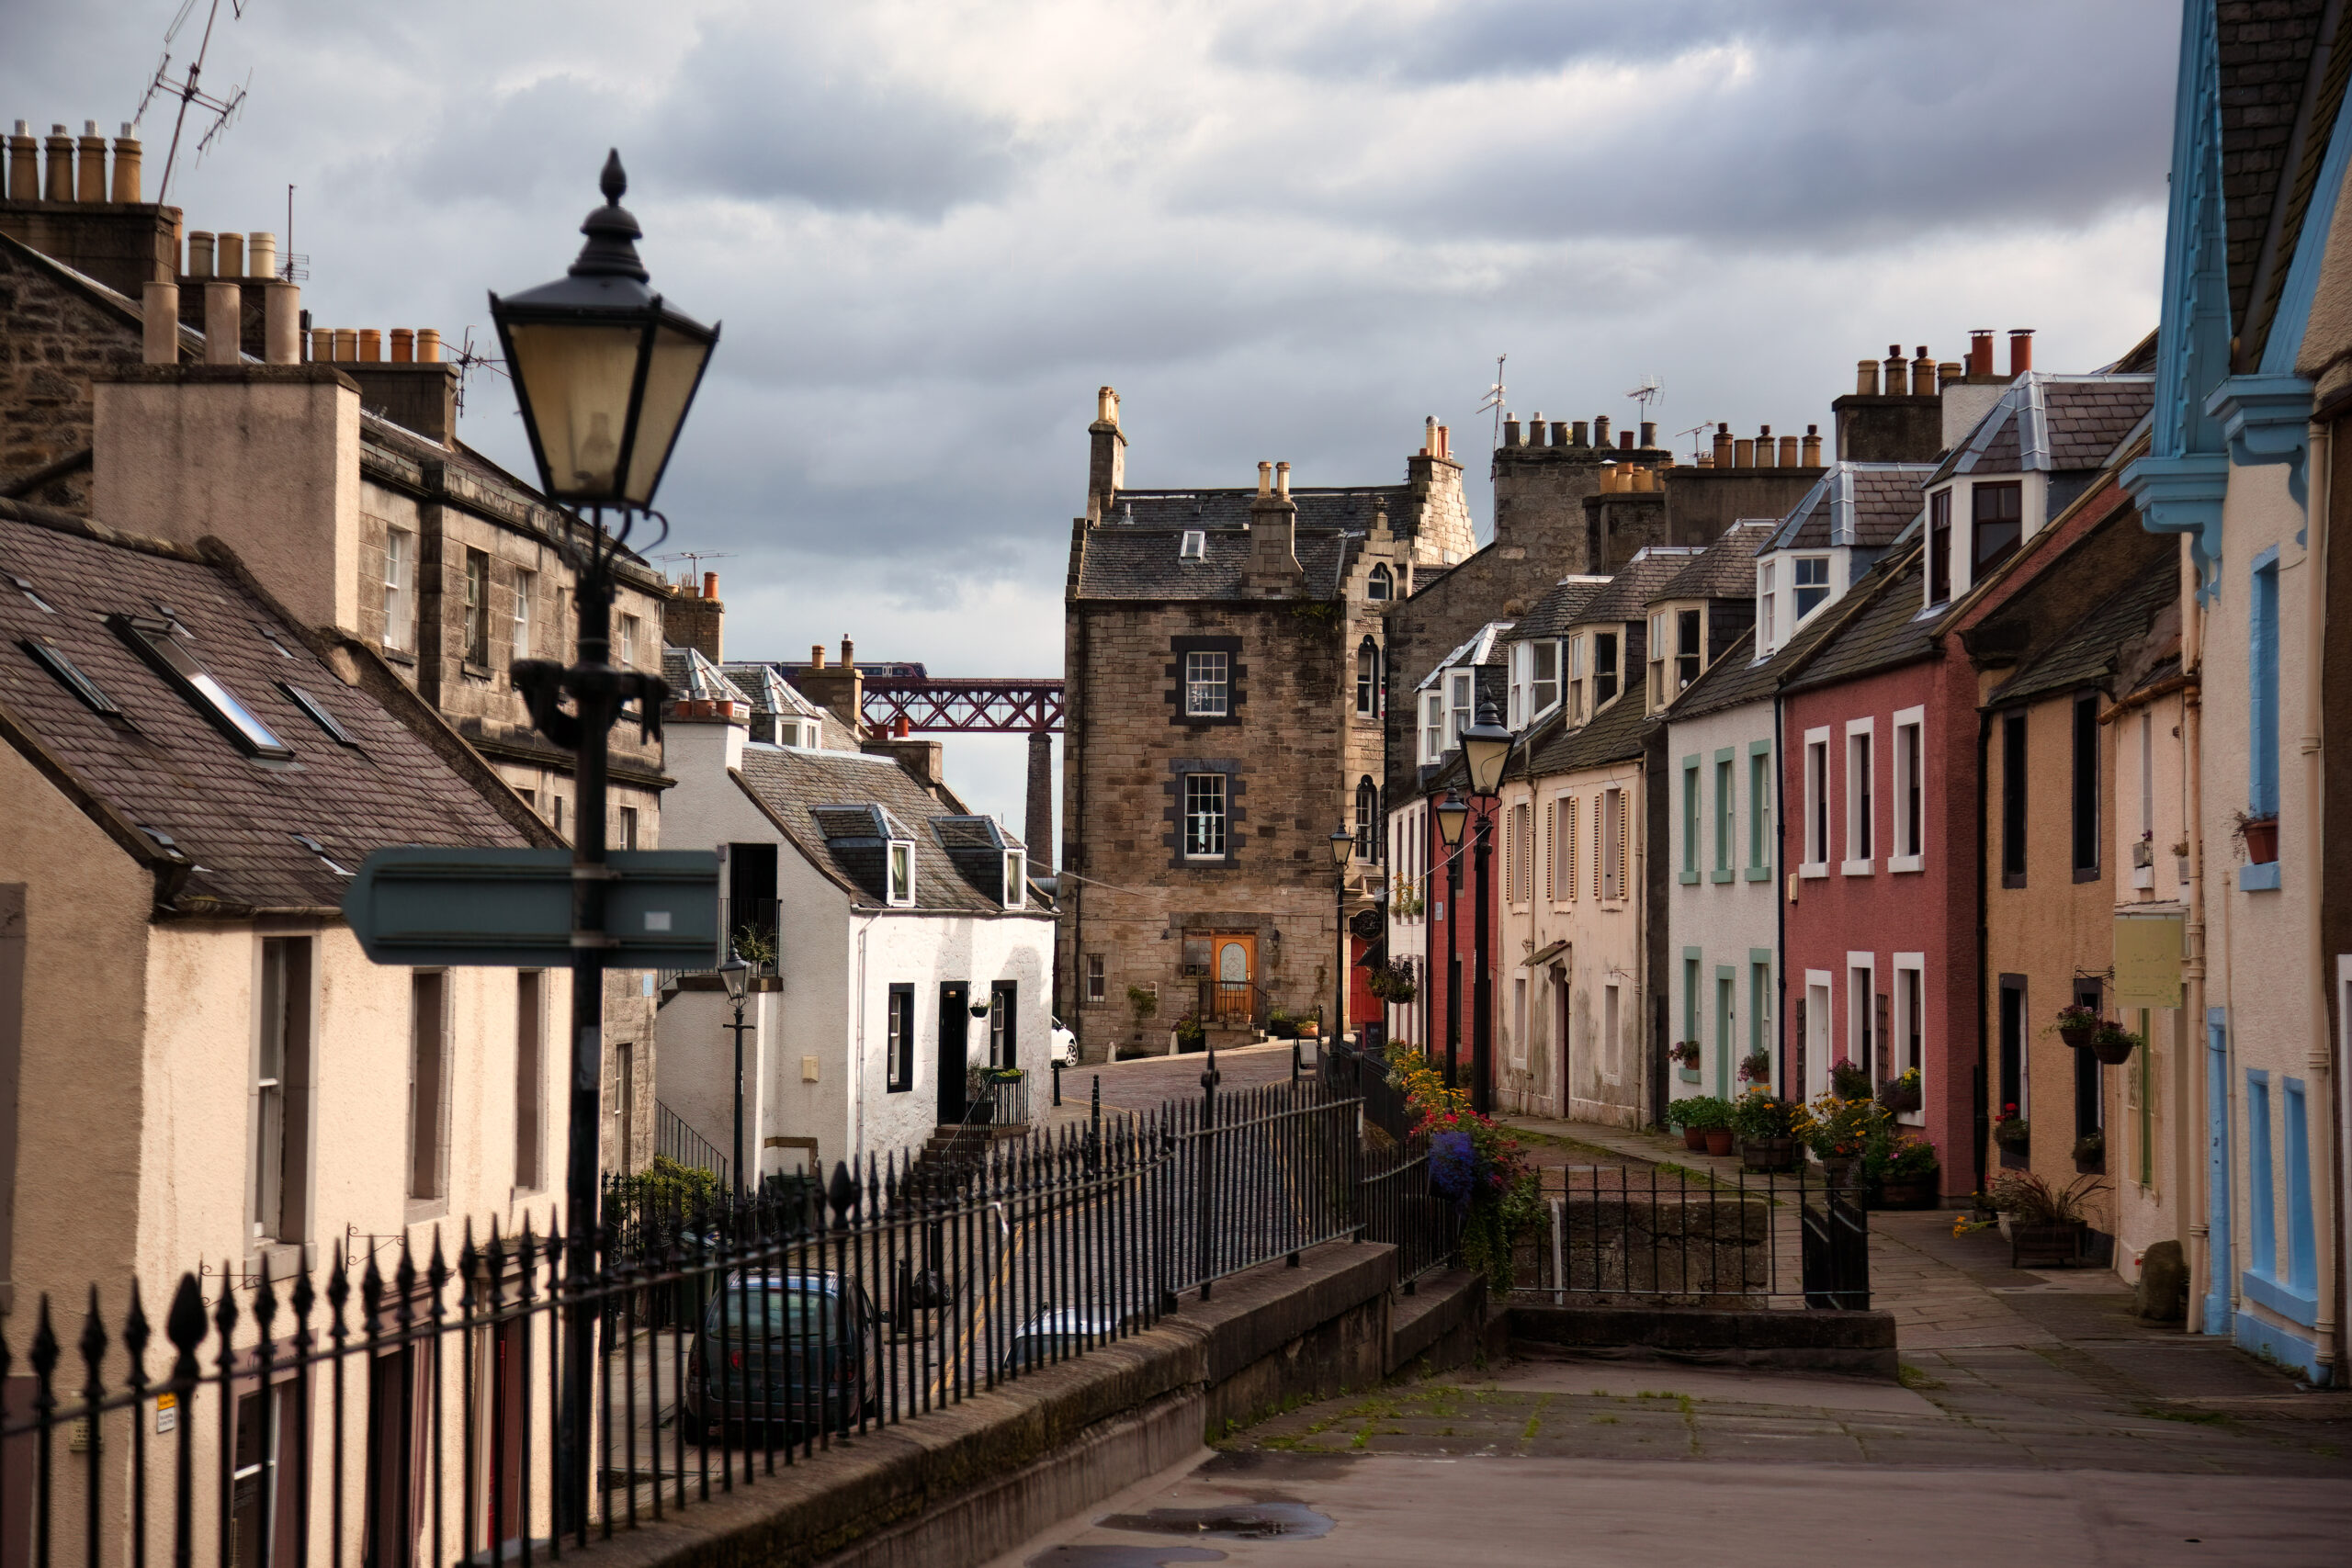 scottish-fixer-swixer-local-production-services-in-scotland-high-street-with-colorful-tenement-houses